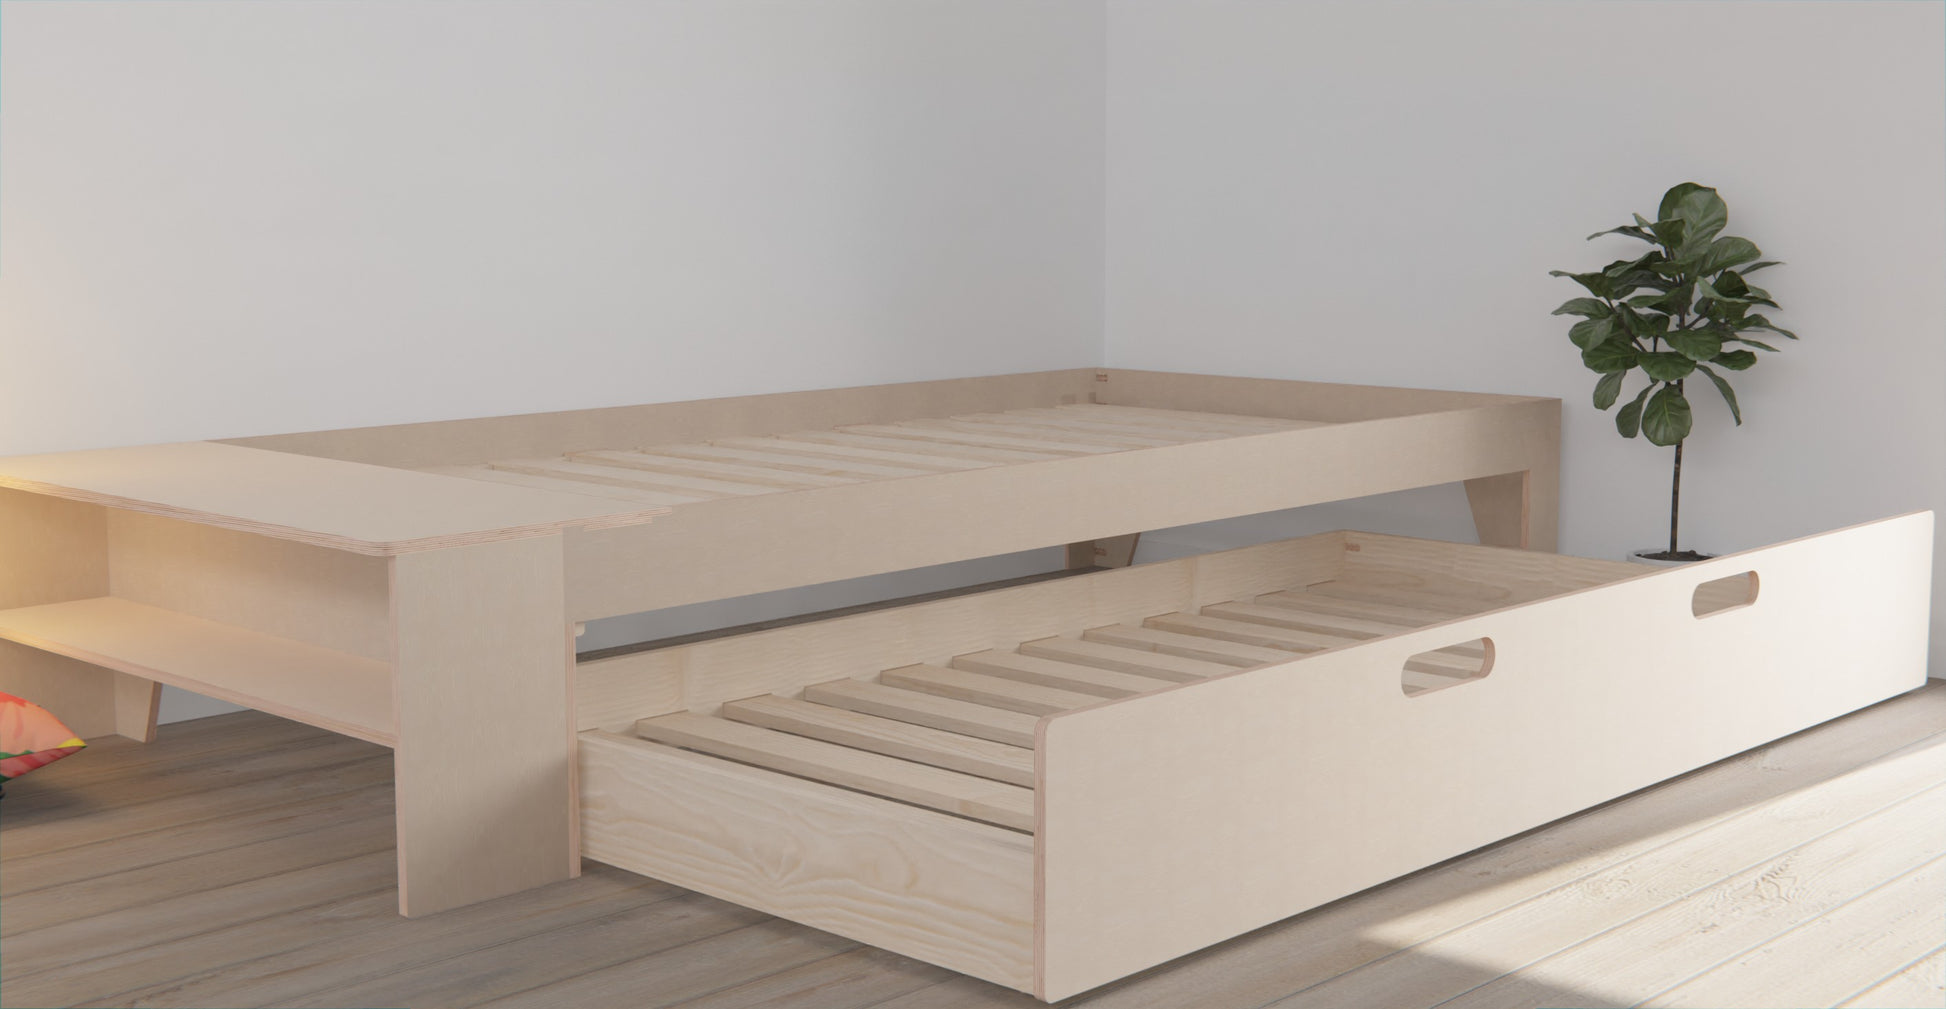 Innovative wooden bed frame with trundle bed and shelf. Transform your bedroom into a multifunctional retreat.